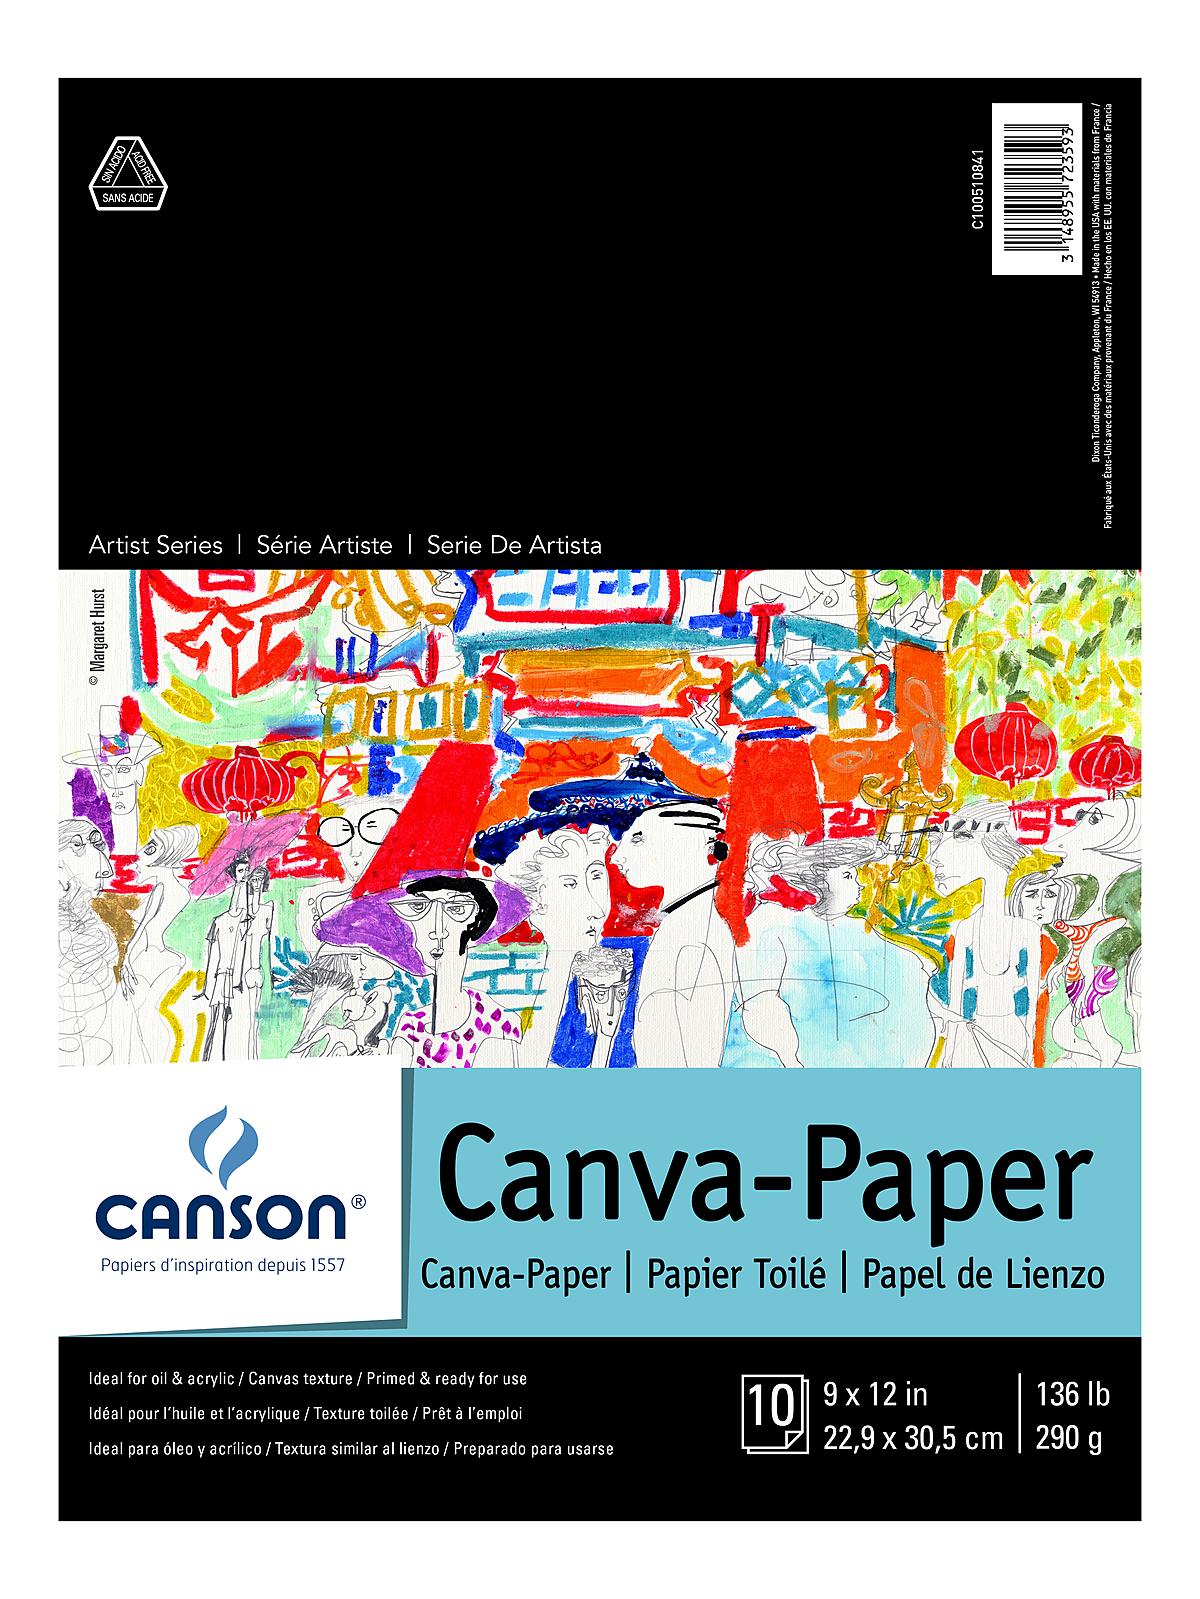 Foundation Canva-paper Pad 9 In. X 12 In.